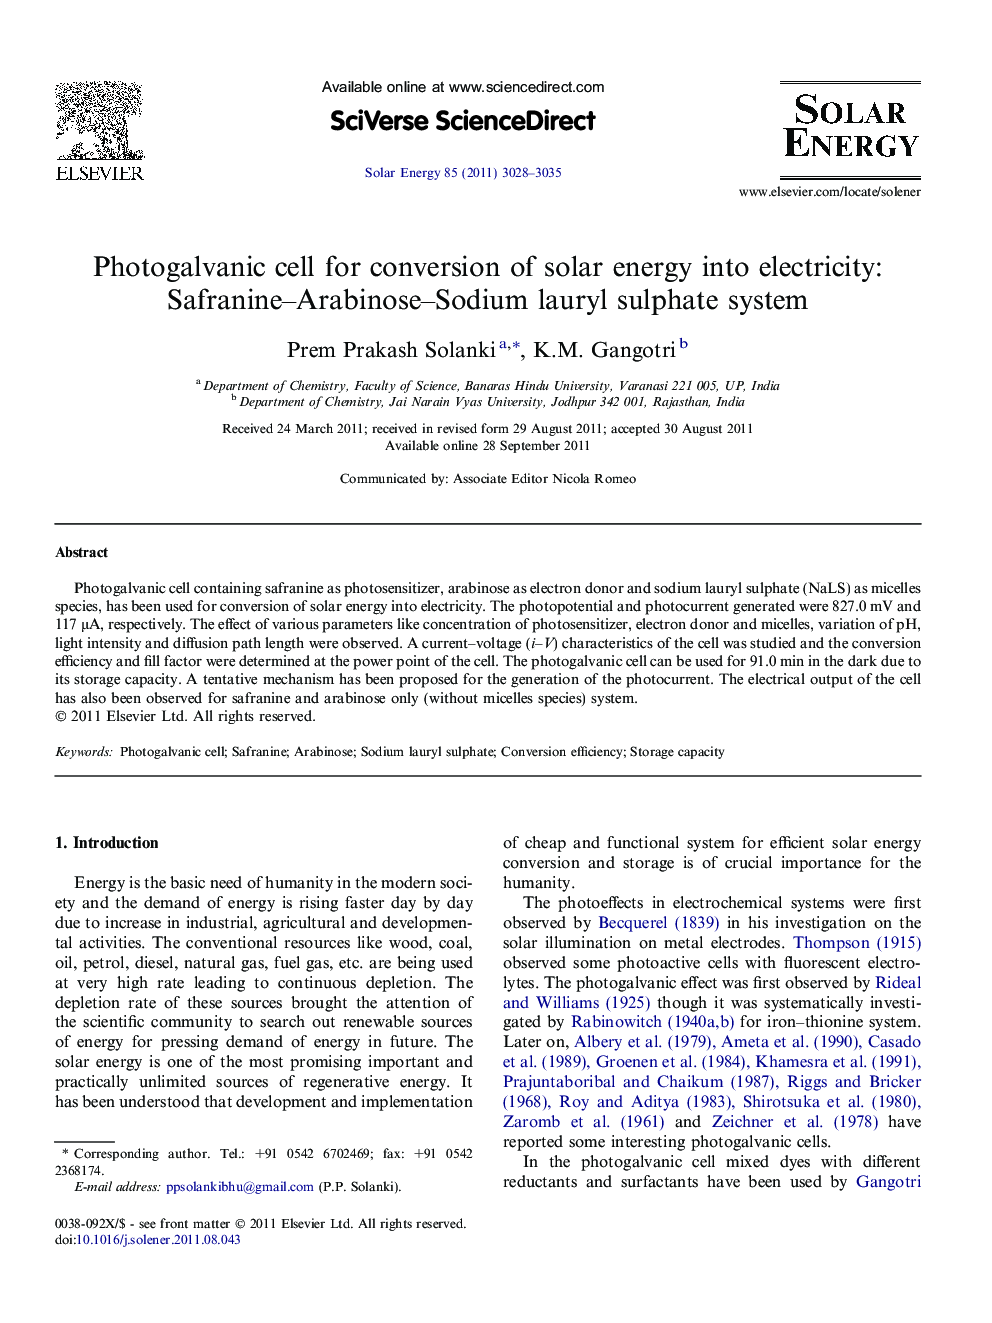 Photogalvanic cell for conversion of solar energy into electricity: Safranine–Arabinose–Sodium lauryl sulphate system